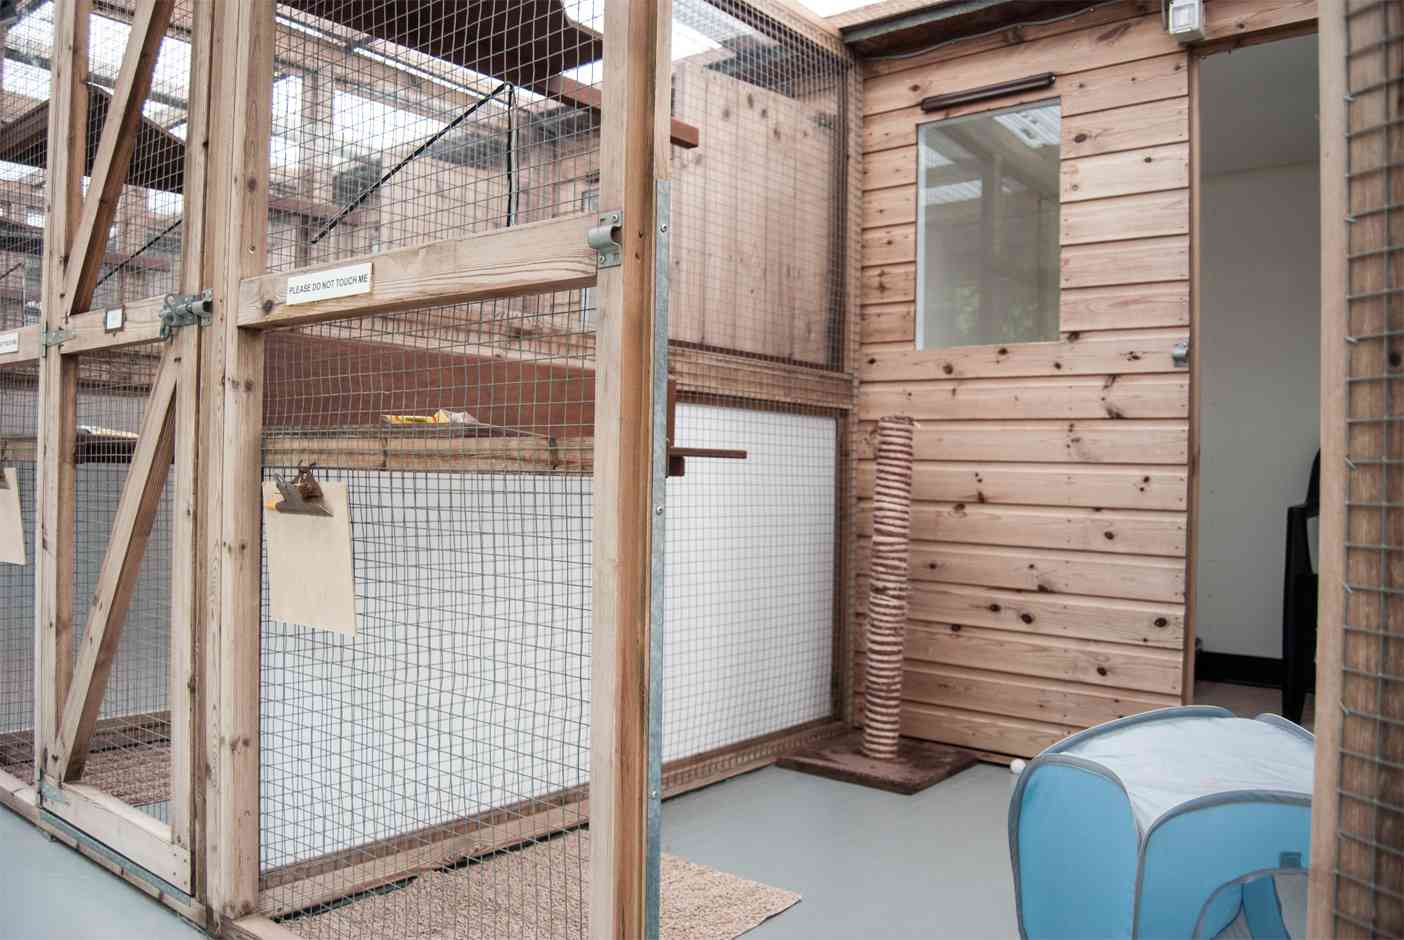 A cabin suitable for 1-2 cats sharing from same household